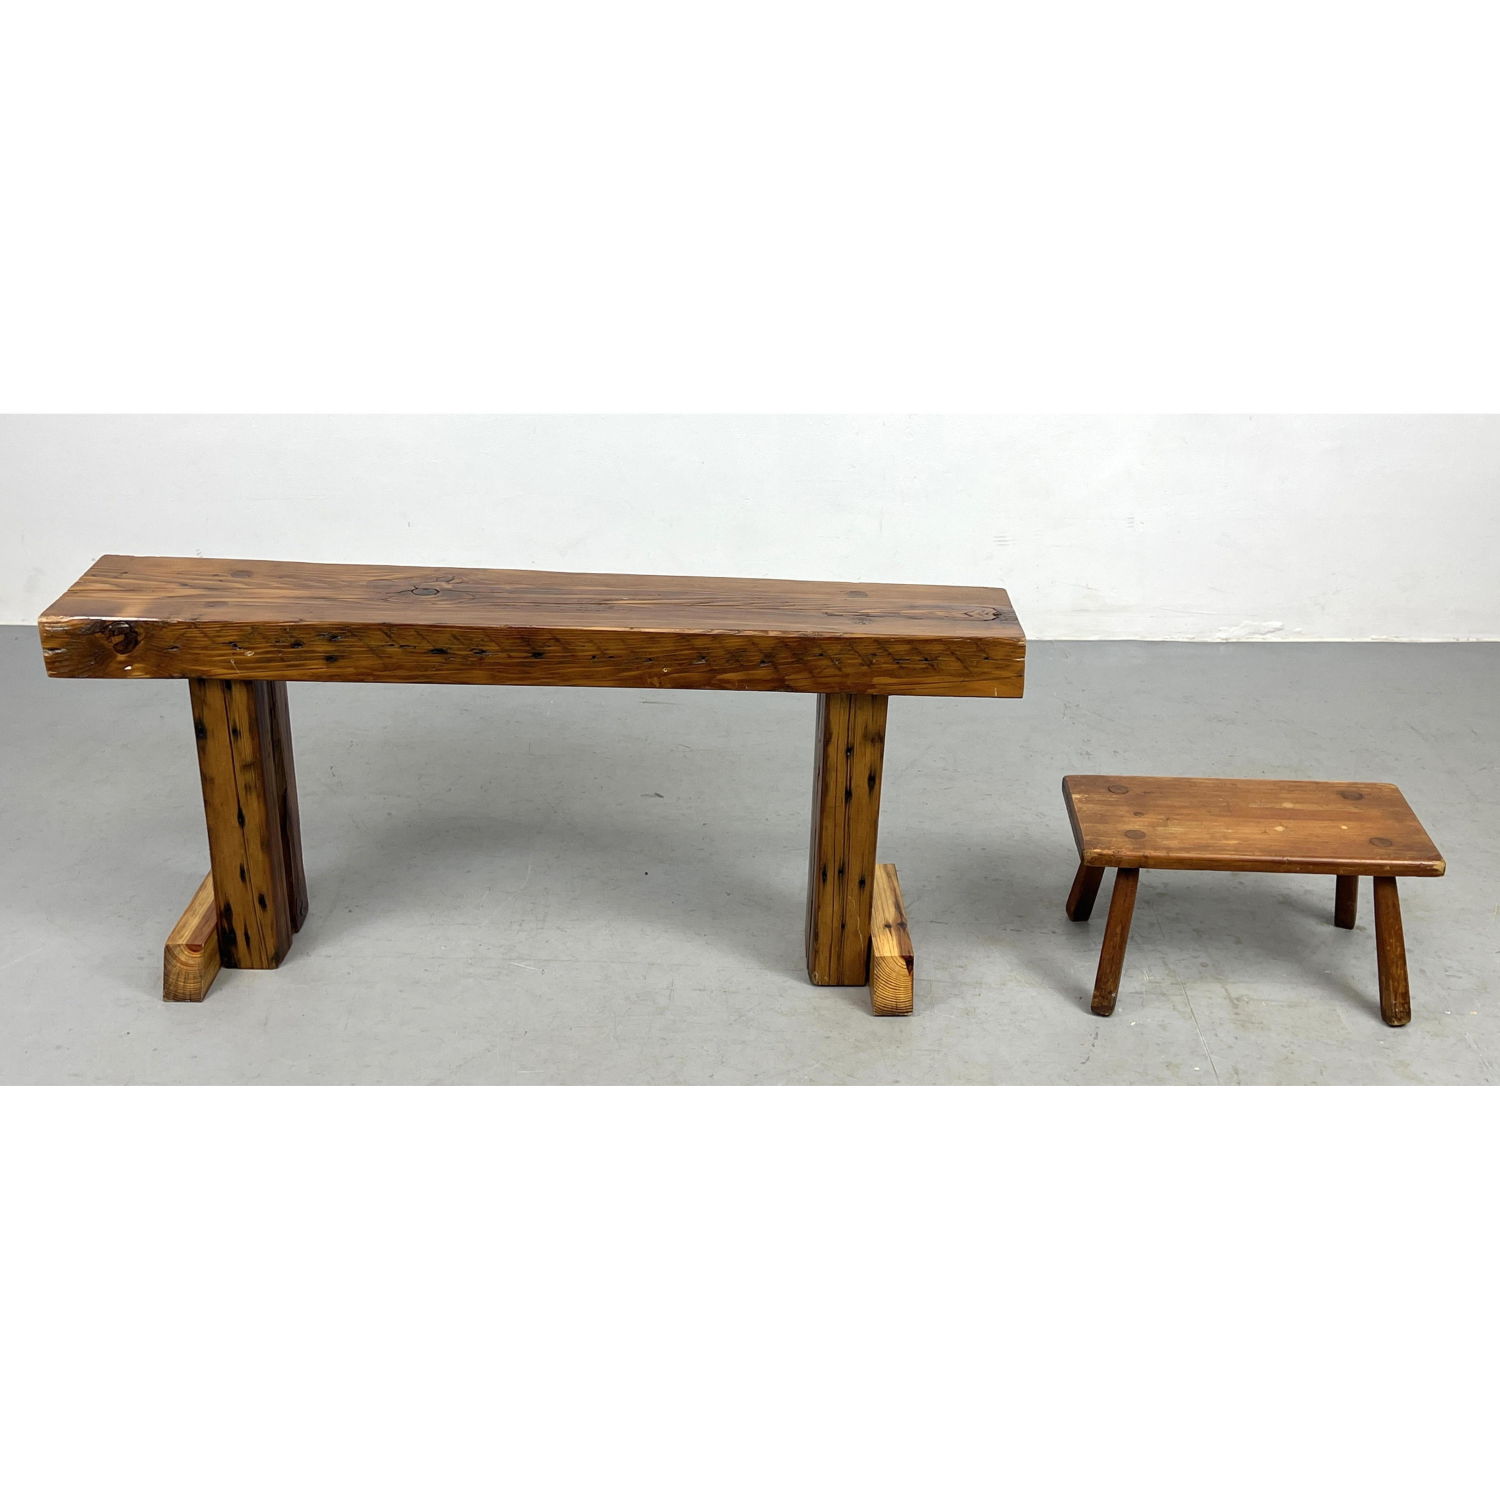 2pc Primitive Pine Bench and Footstool.